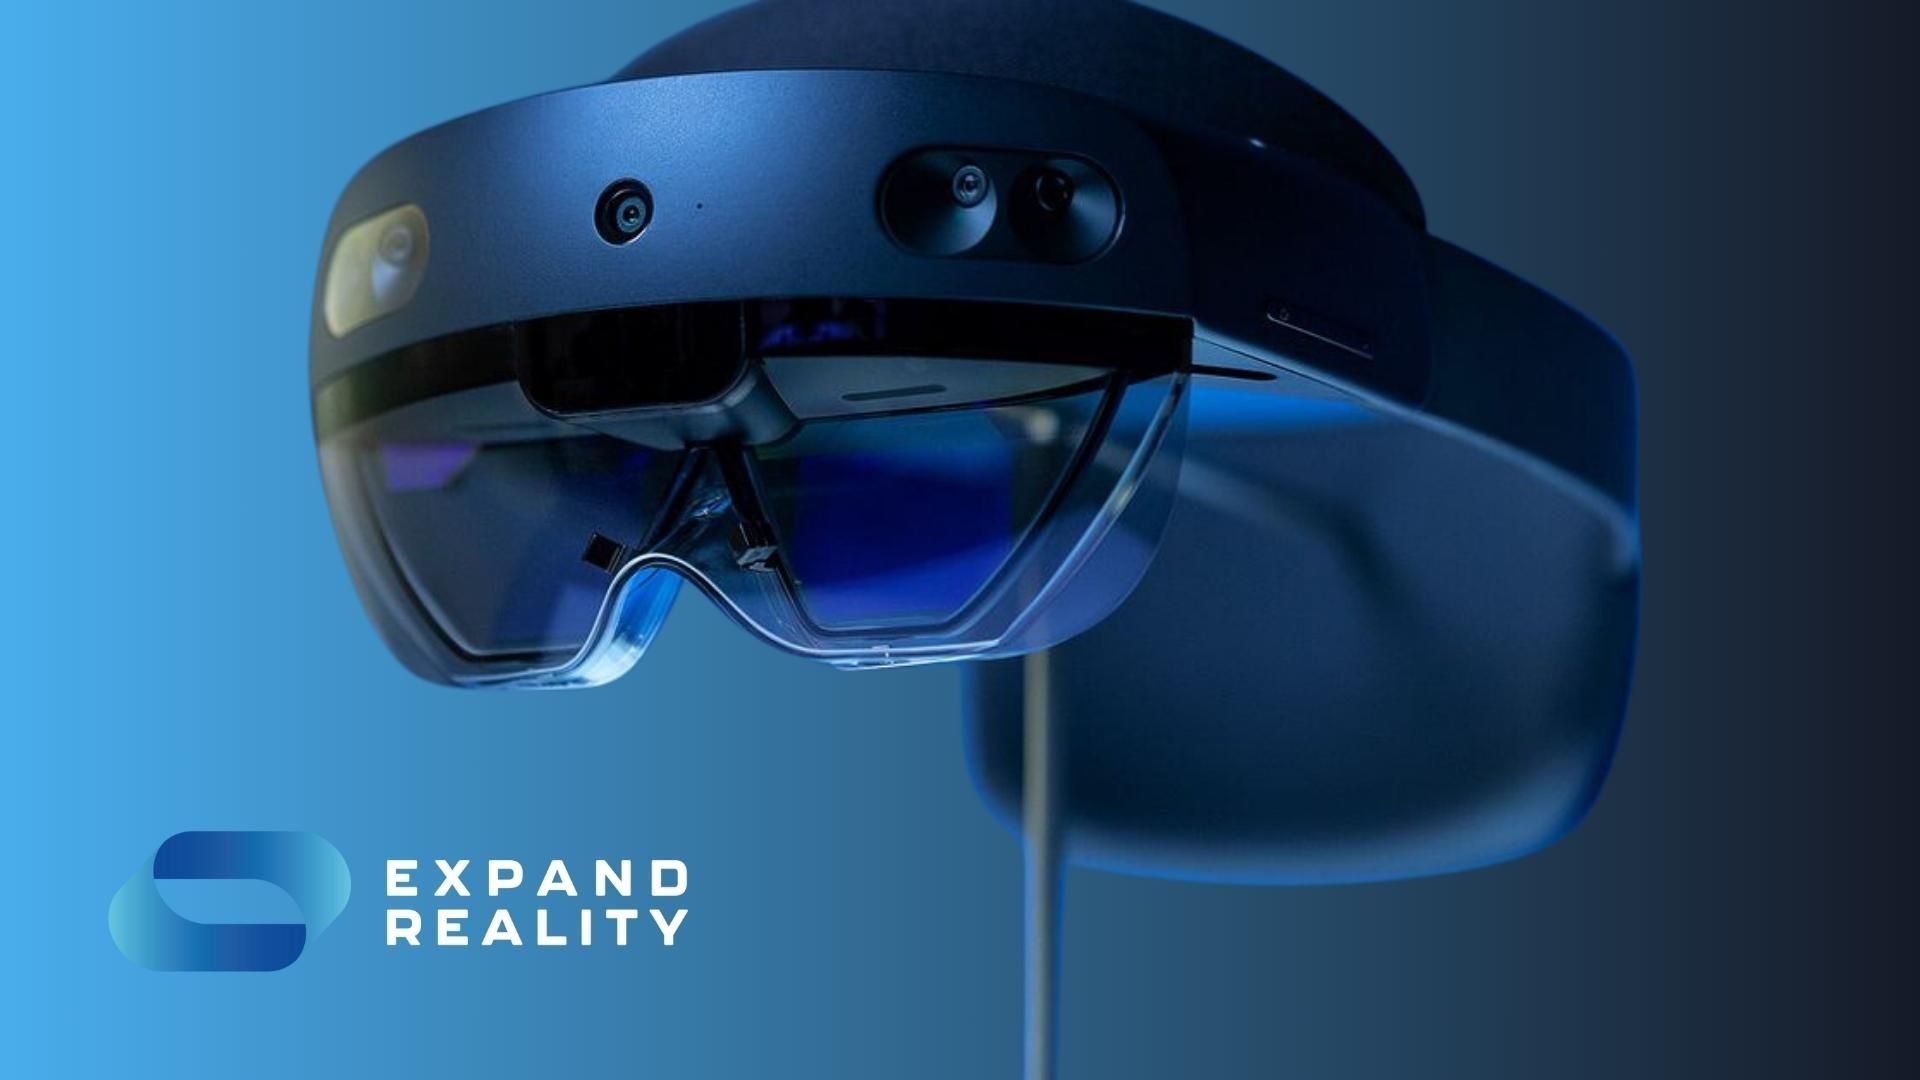 Microsoft HoloLens 2 is one of the most advanced MR headsets on the market. Join us as we run down 4